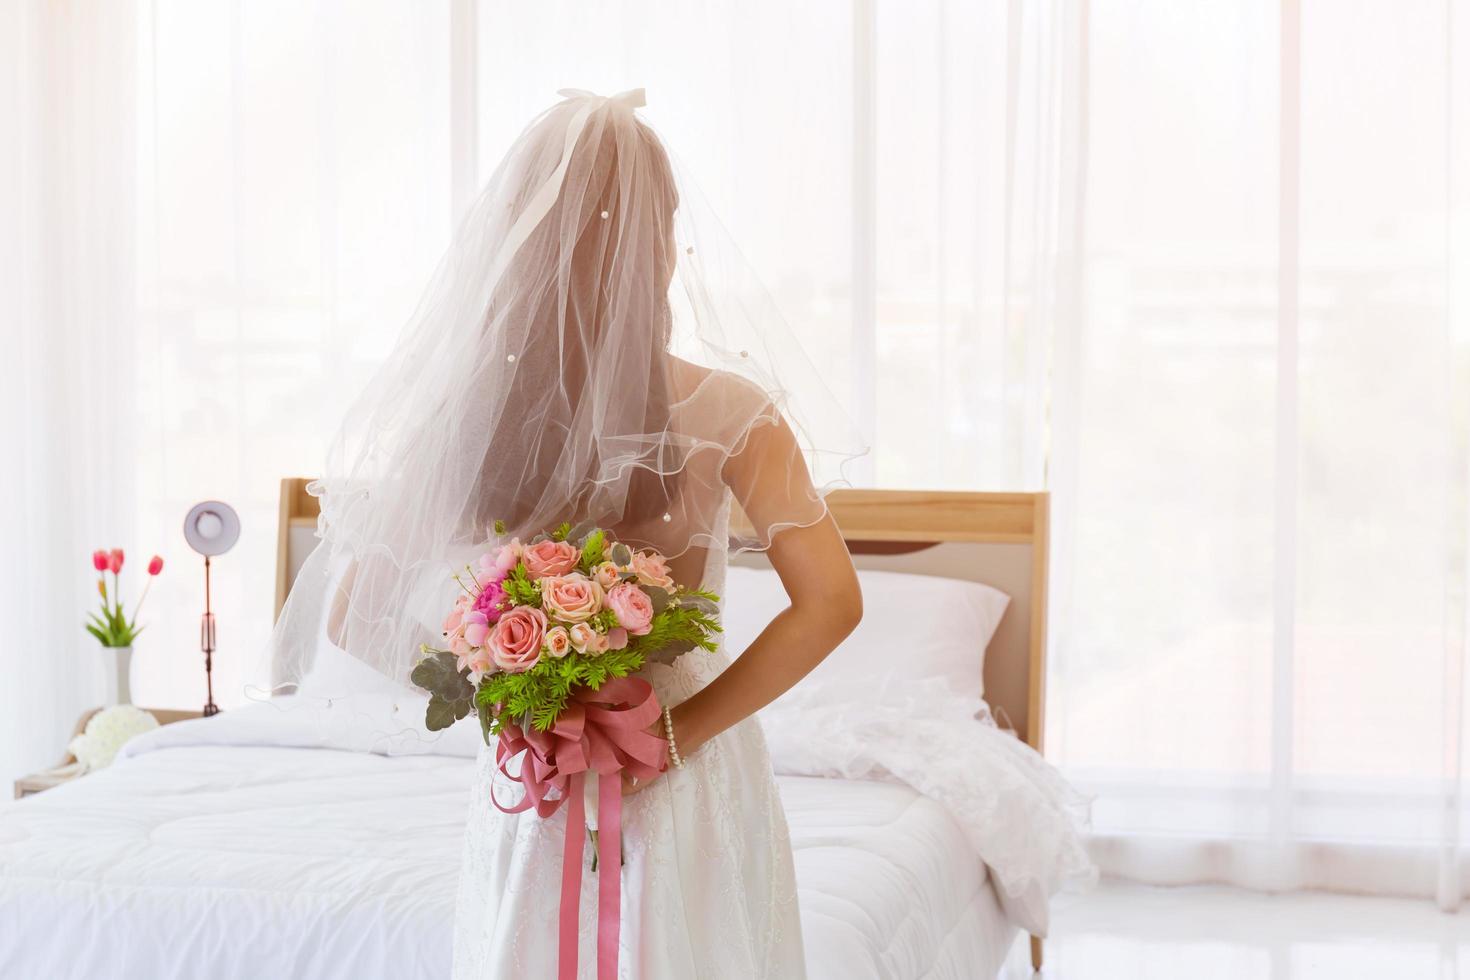 An Asian bride wore a white wedding dress, standing, holding a bouquet of beautiful flowers behind her. photo